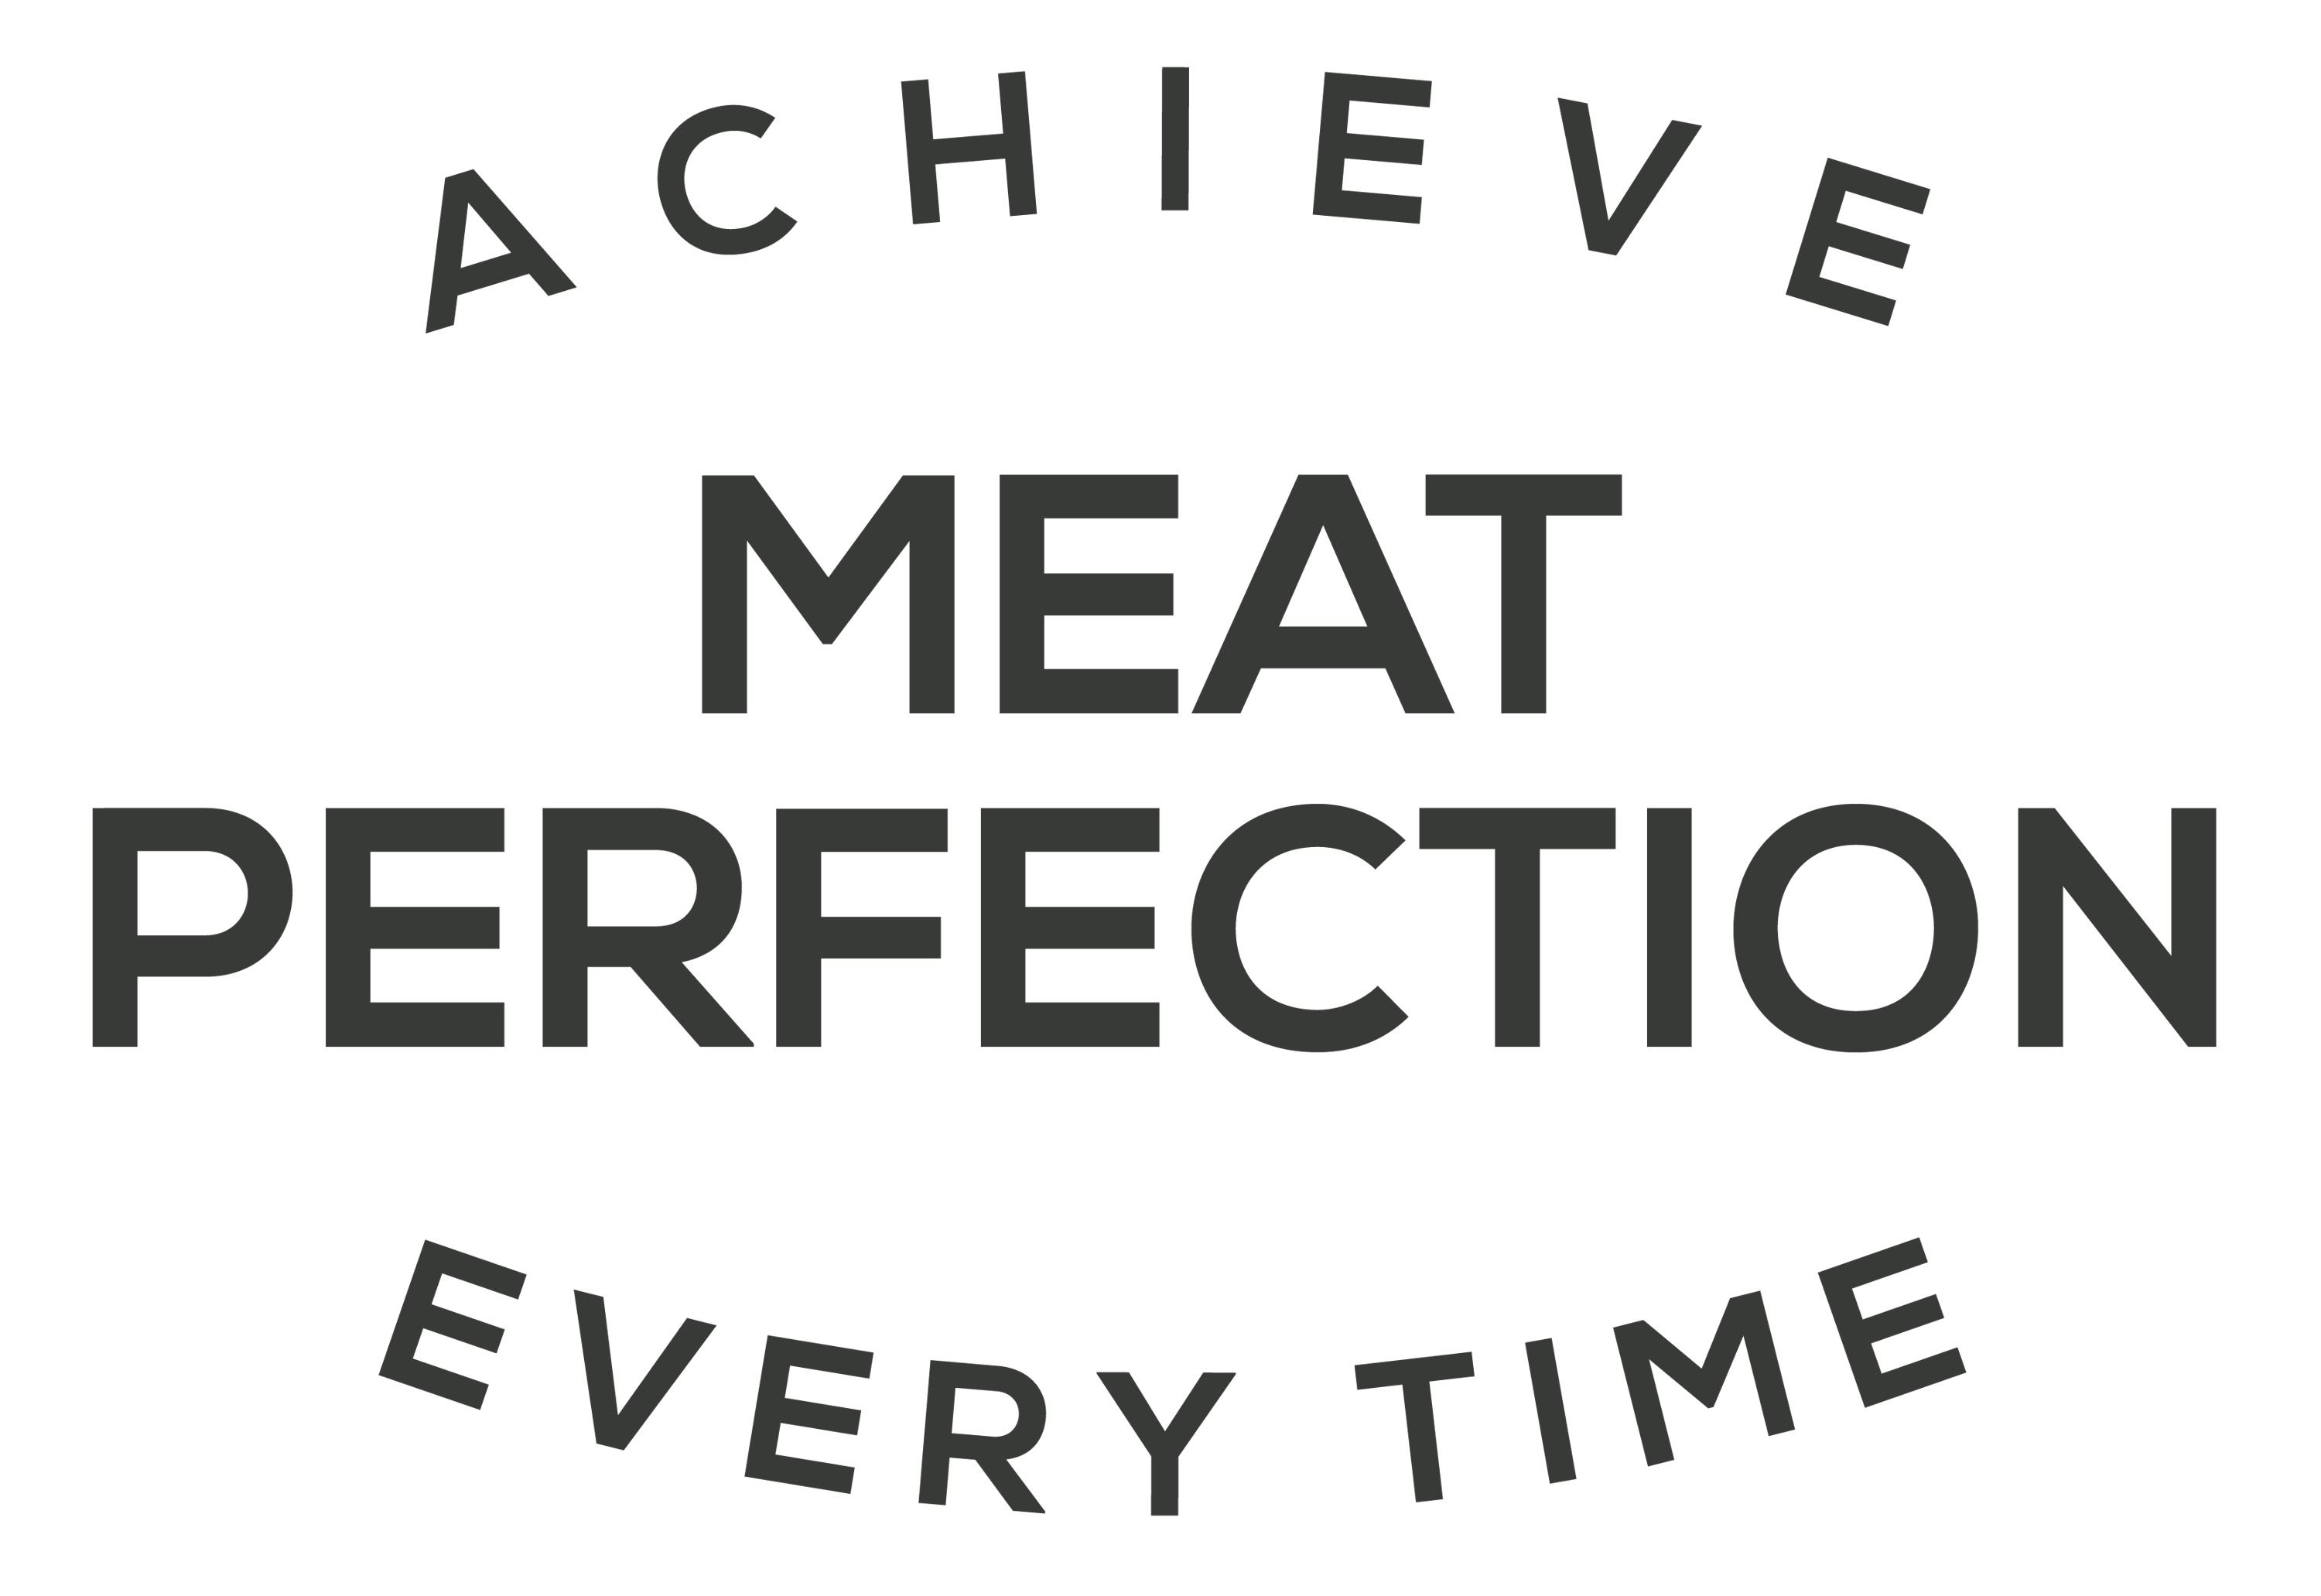 Achieve Meat Perfection Every Time with The MeatStick